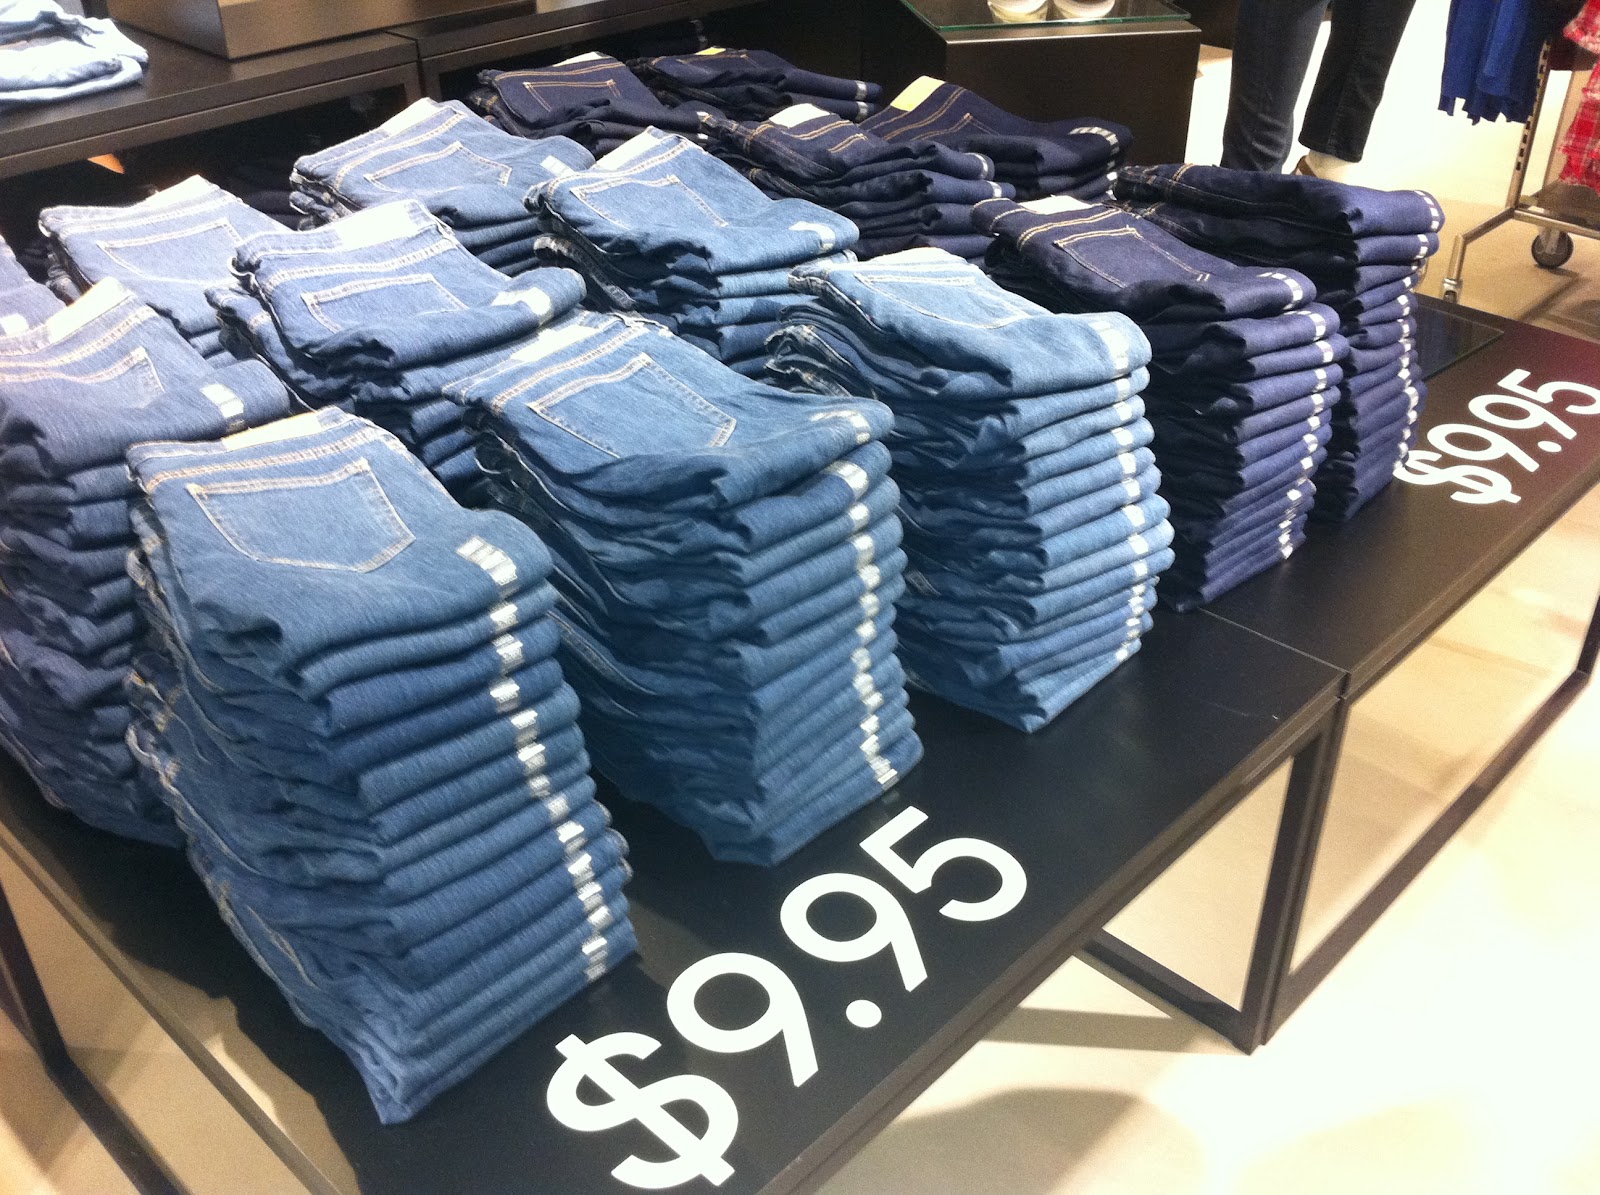 In The Know: The Best Skinny Jeans - $9.95 at H&M!